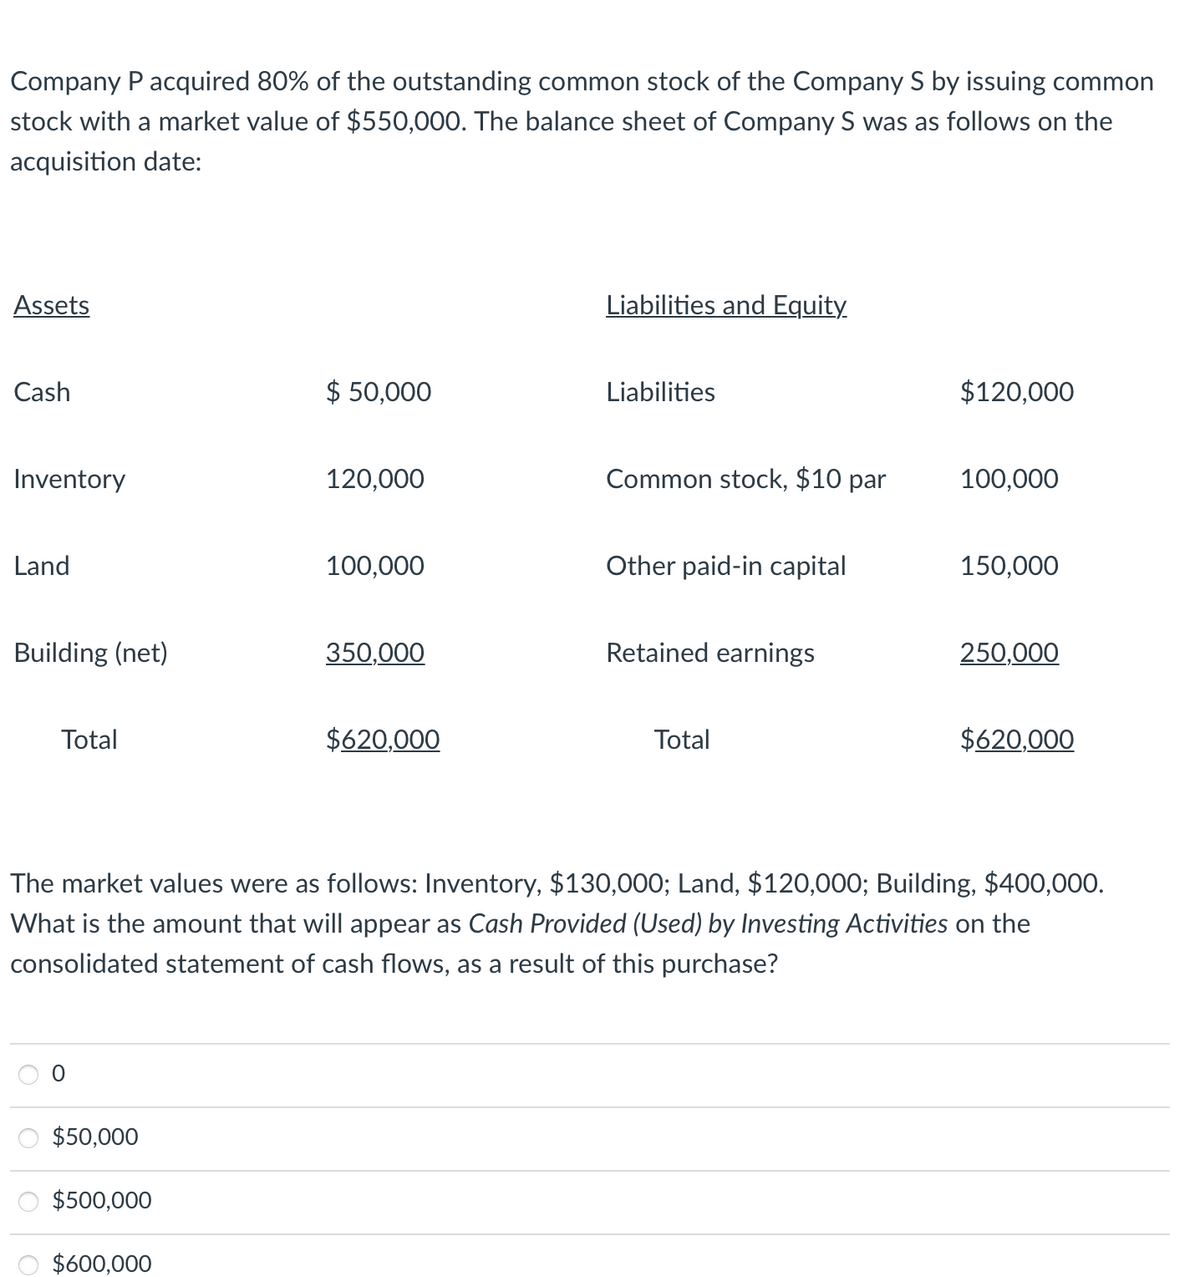 Company P acquired 80% of the outstanding common stock of the Company S by issuing common
stock with a market value of $550,000. The balance sheet of Company S was as follows on the
acquisition date:
Assets
Cash
Inventory
Land
Building (net)
Total
$50,000
500
$500,000
$50,000
$600,000
120,000
100,000
350,000
$620,000
Liabilities and Equity
Liabilities
Common stock, $10 par
Other paid-in capital
Retained earnings
Total
$120,000
100,000
The market values were as follows: Inventory, $130,000; Land, $120,000; Building, $400,000.
What is the amount that will appear as Cash Provided (Used) by Investing Activities on the
consolidated statement of cash flows, as a result of this purchase?
150,000
250,000
$620,000